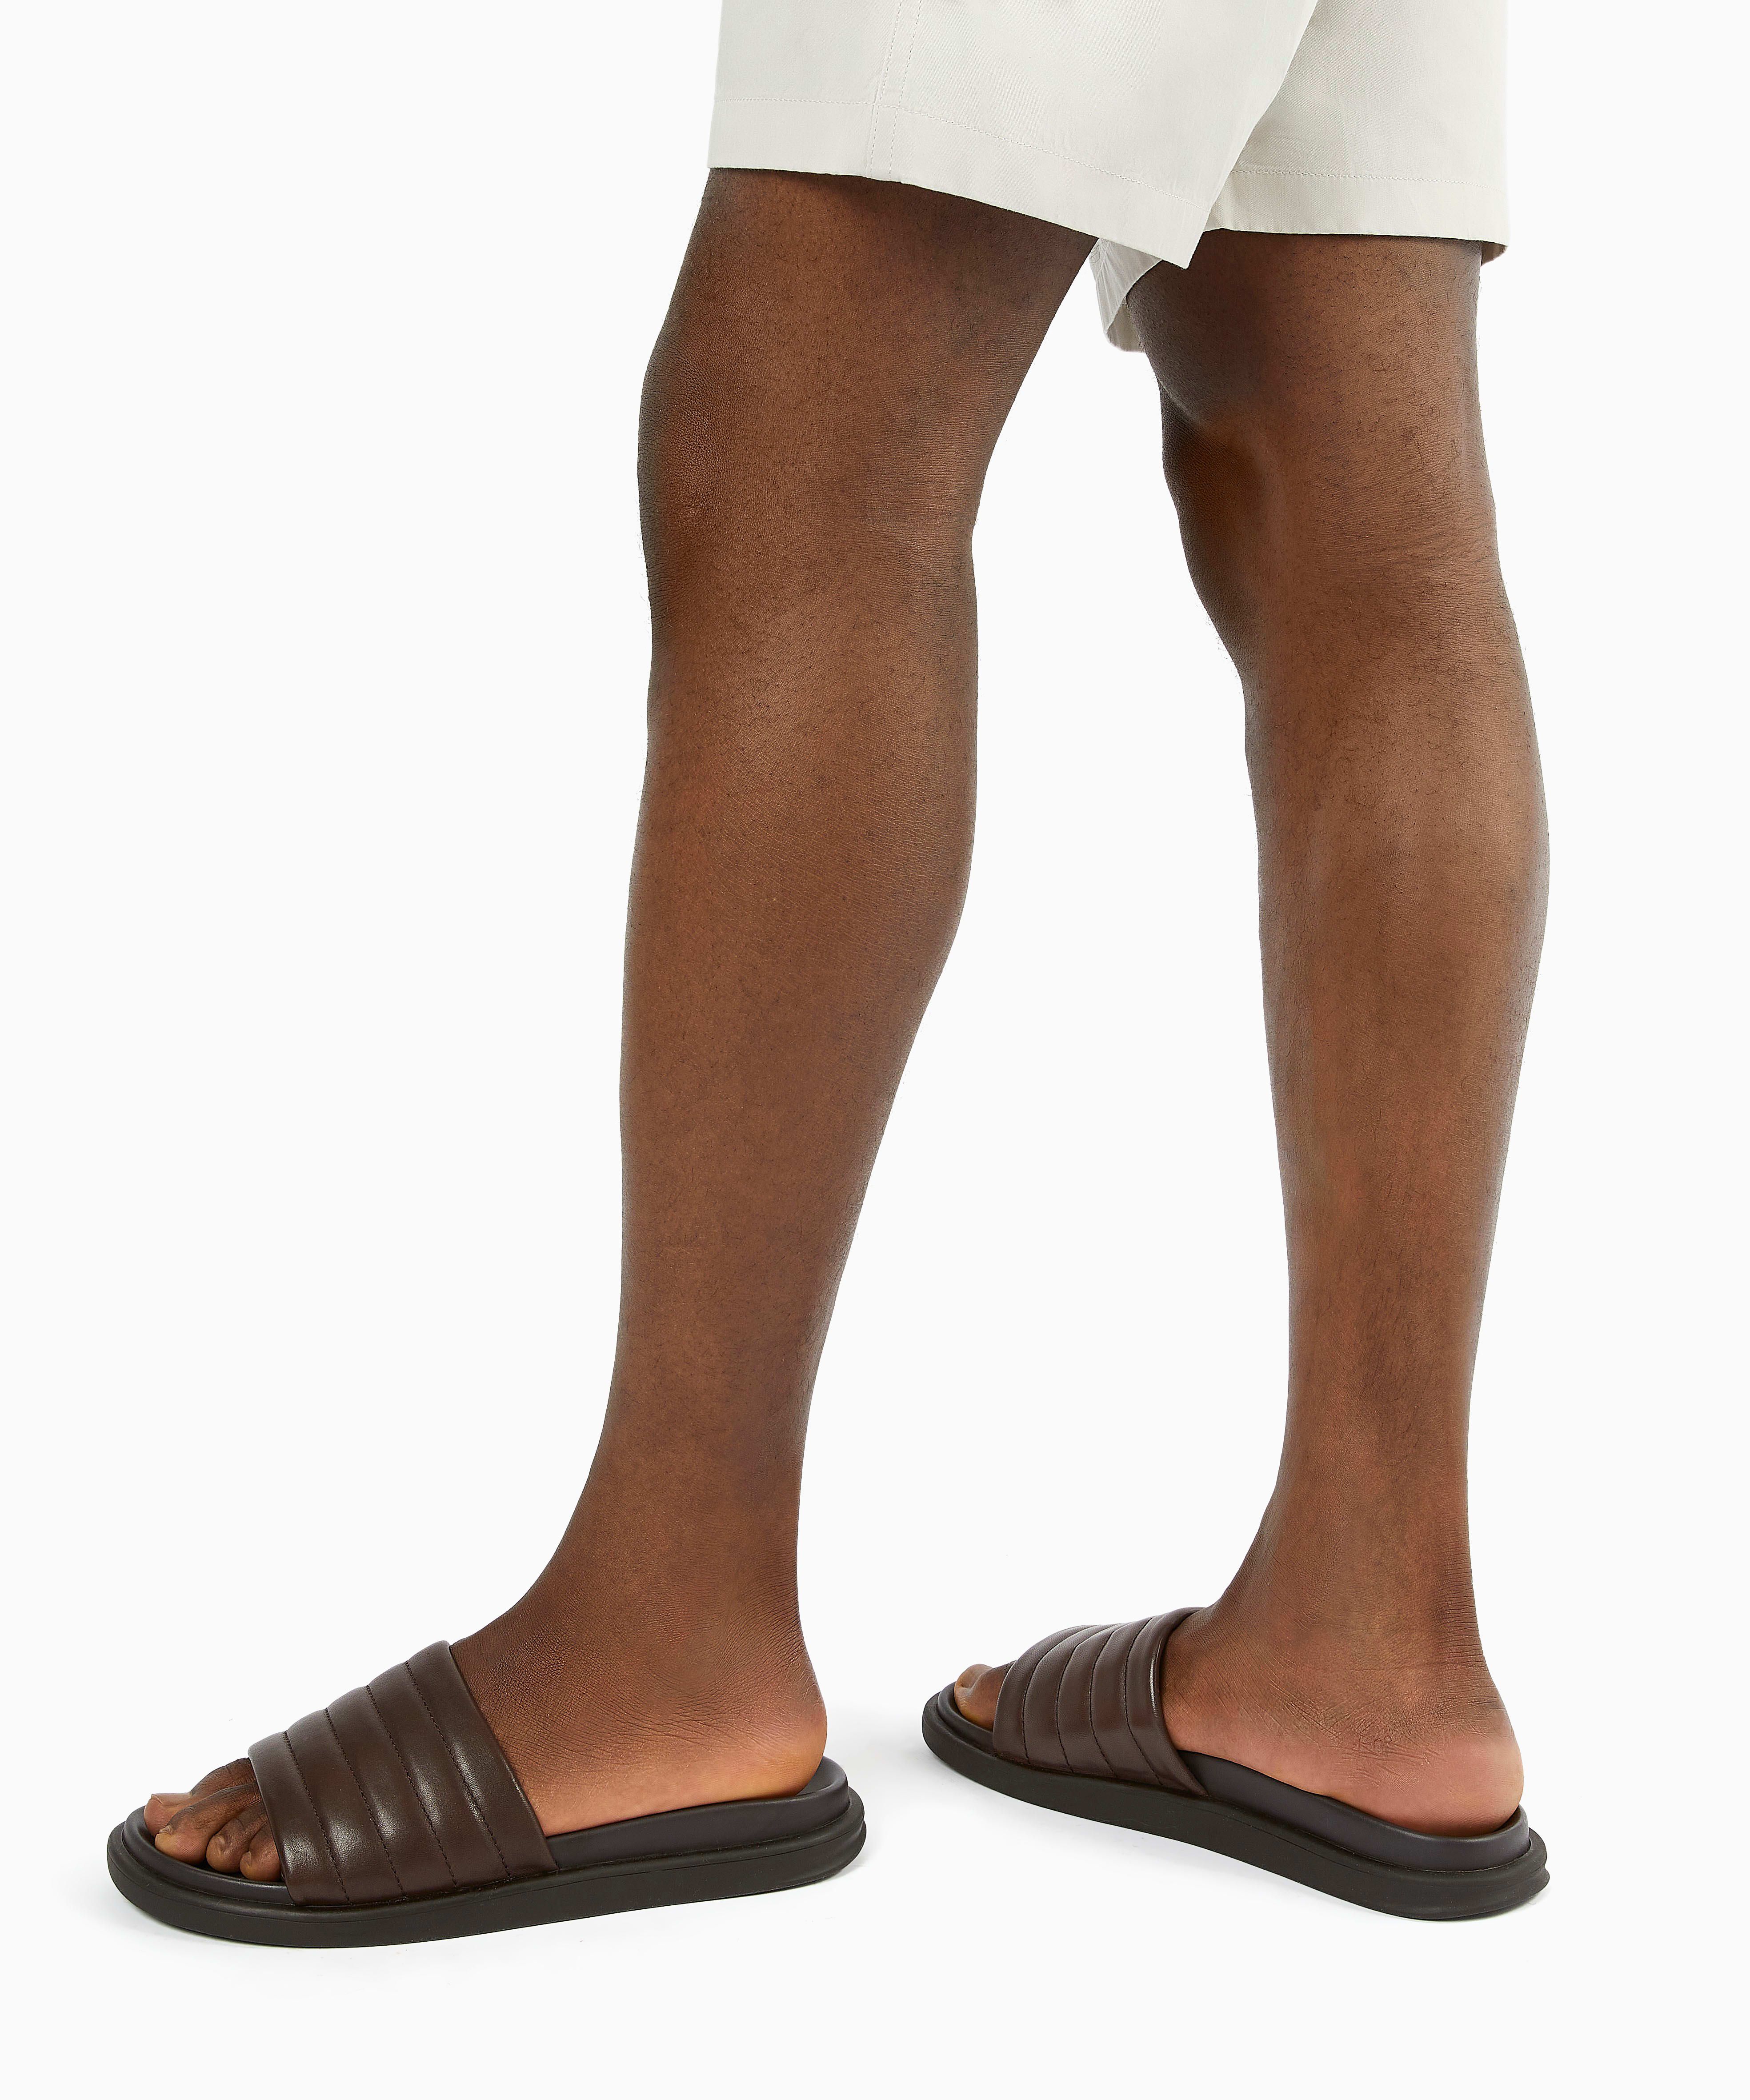 Sun-soaked destinations call for a pair of pool ready sliders. Comfortable and durable this must-have style has been designed in matte leather with padded straps and moulded footbeds.